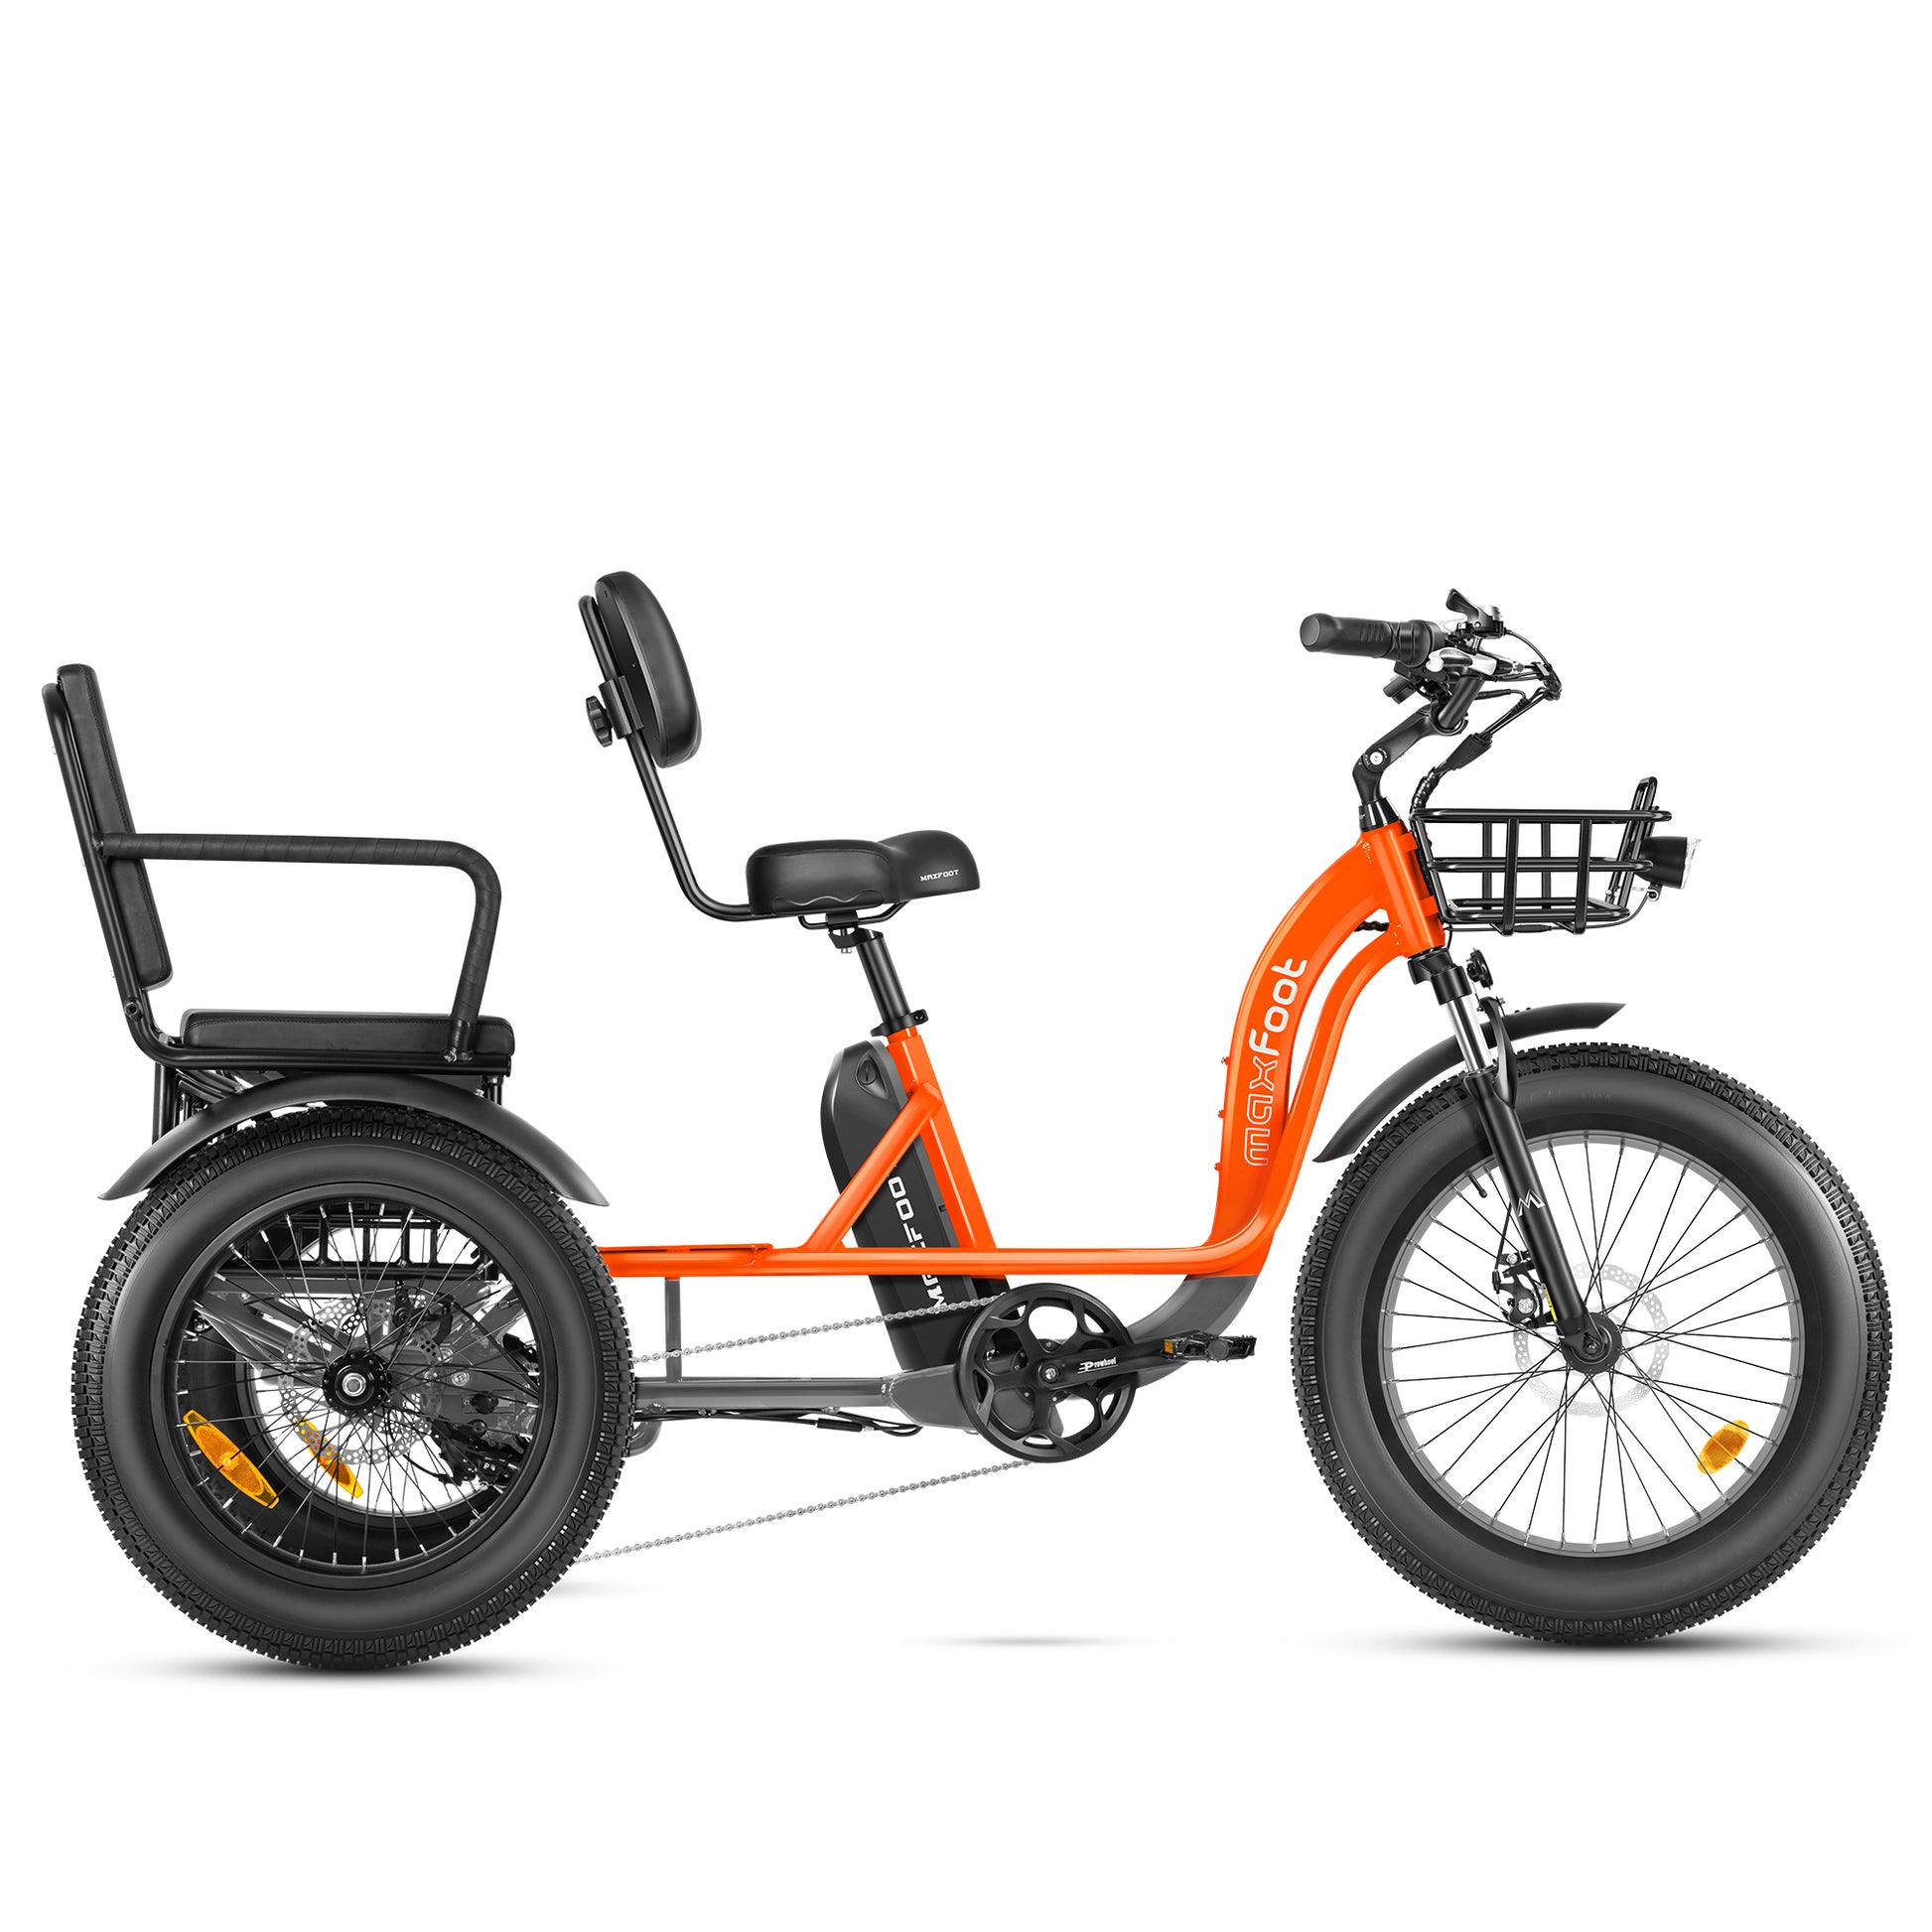 An orange mf-33 elelctric tricycle